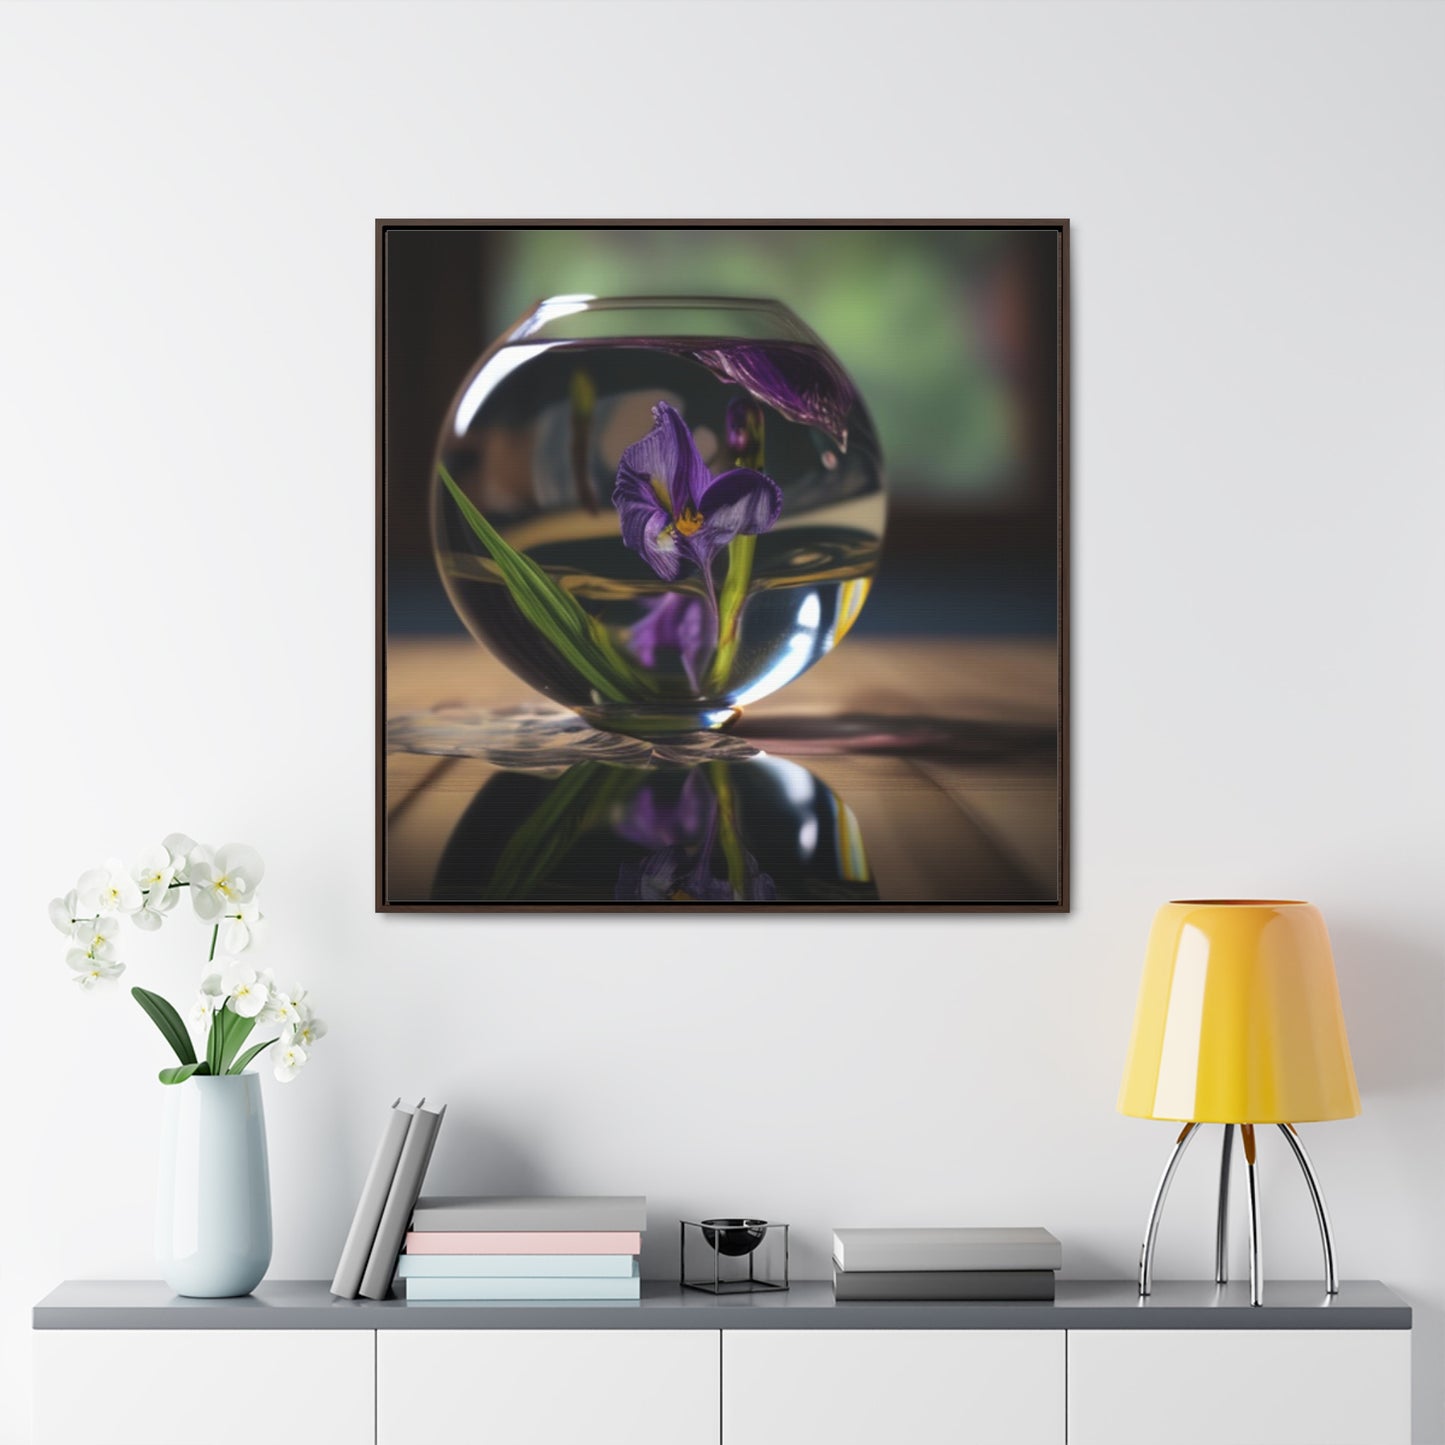 Gallery Canvas Wraps, Square Frame Purple Iris in a vase 1